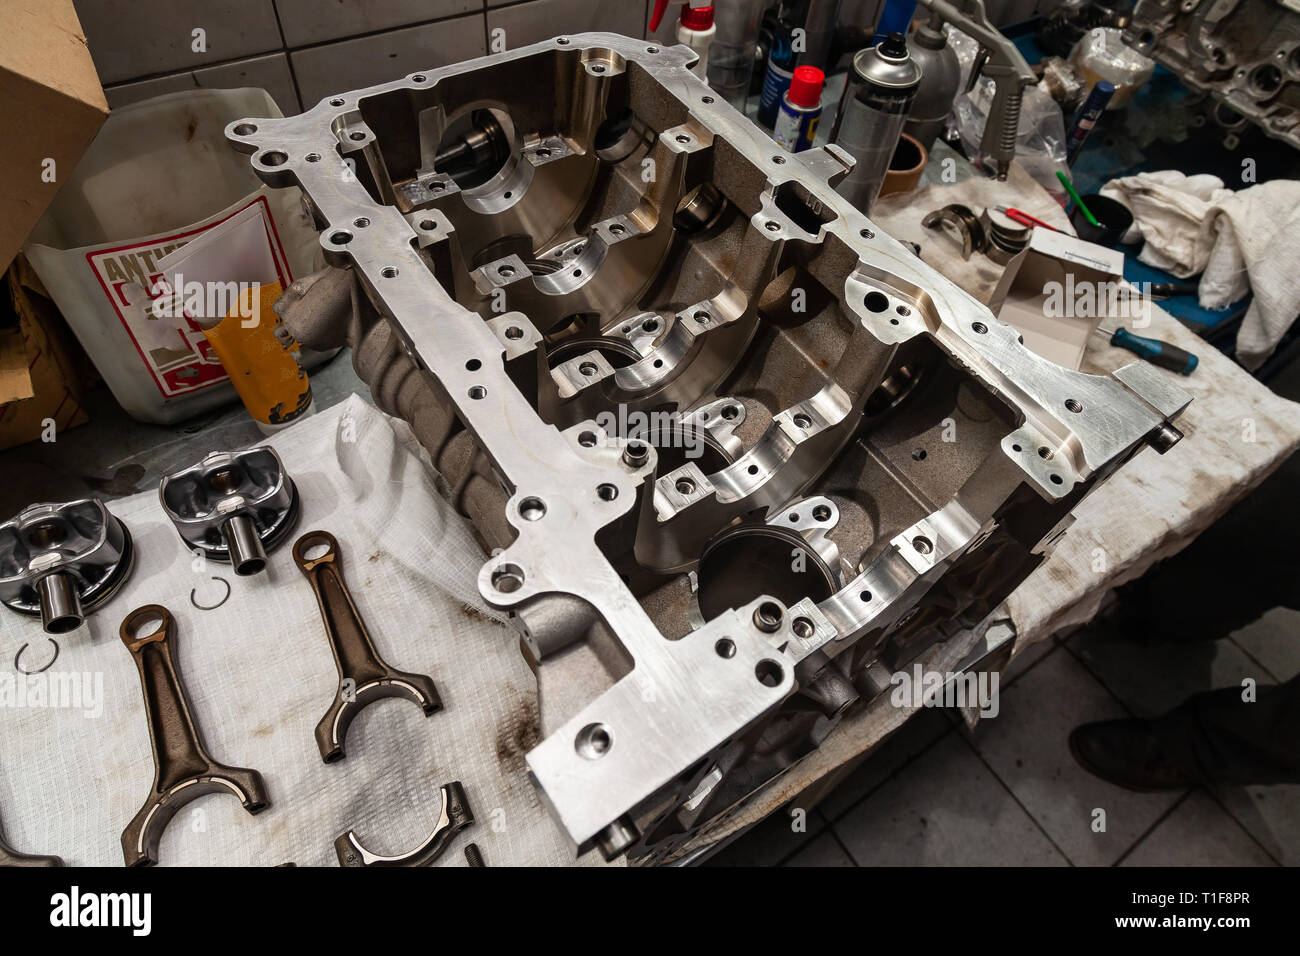 A four-cylinder engine dissembled and removed from car on a workbench in a vehicle repair workshop. Auto service industry. Stock Photo